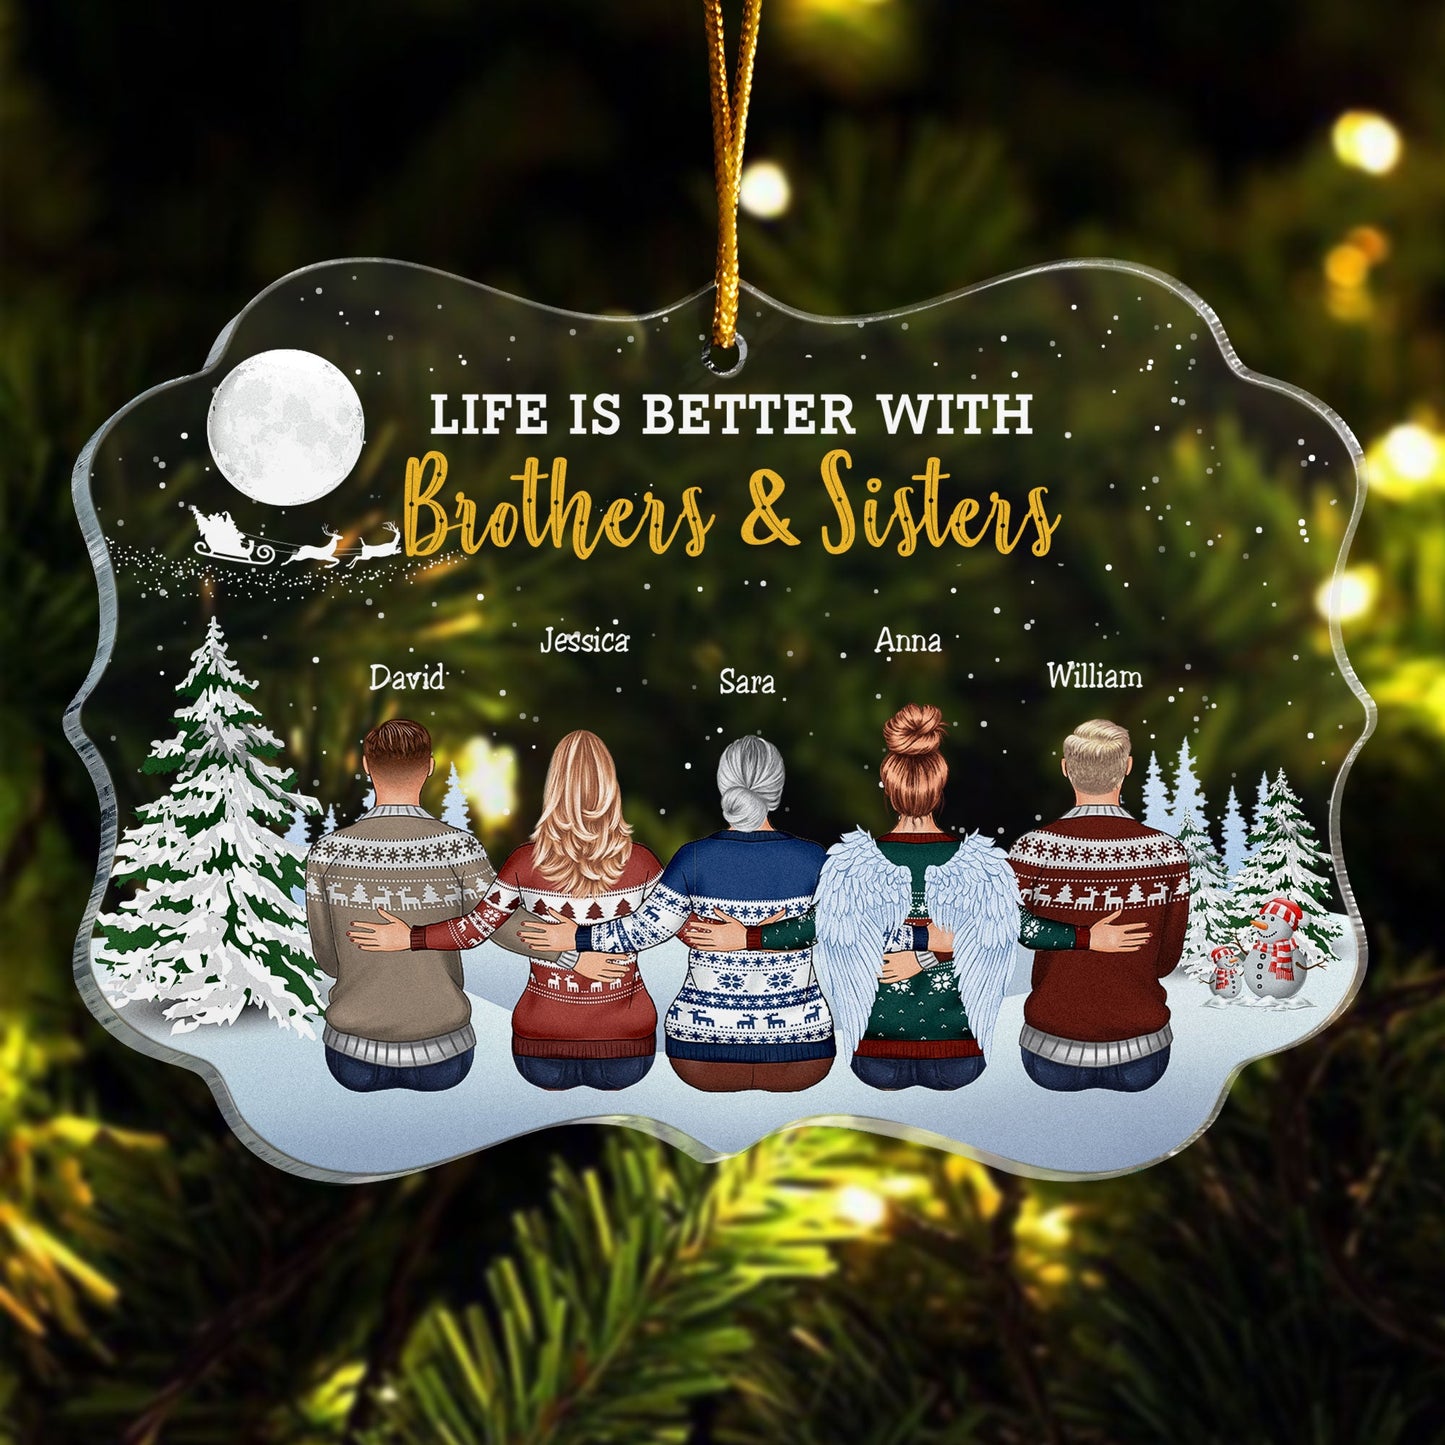 The Greatest Gift Our Parents Gave Us Was Each Other - Up To 20 People - Personalized Acrylic Ornament